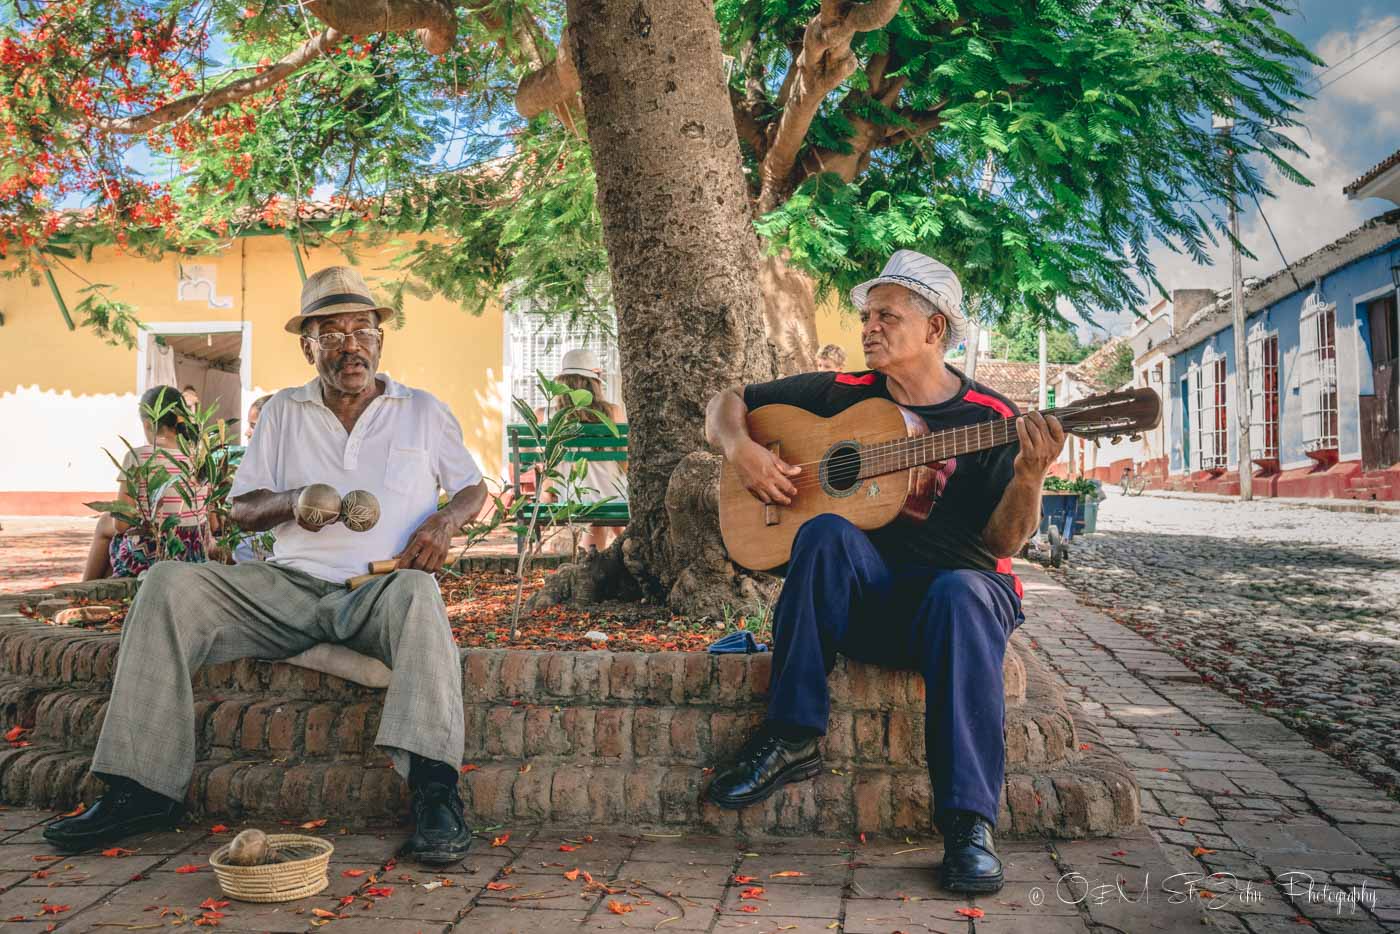 35 Photos That Will Inspire You to Travel to Cuba